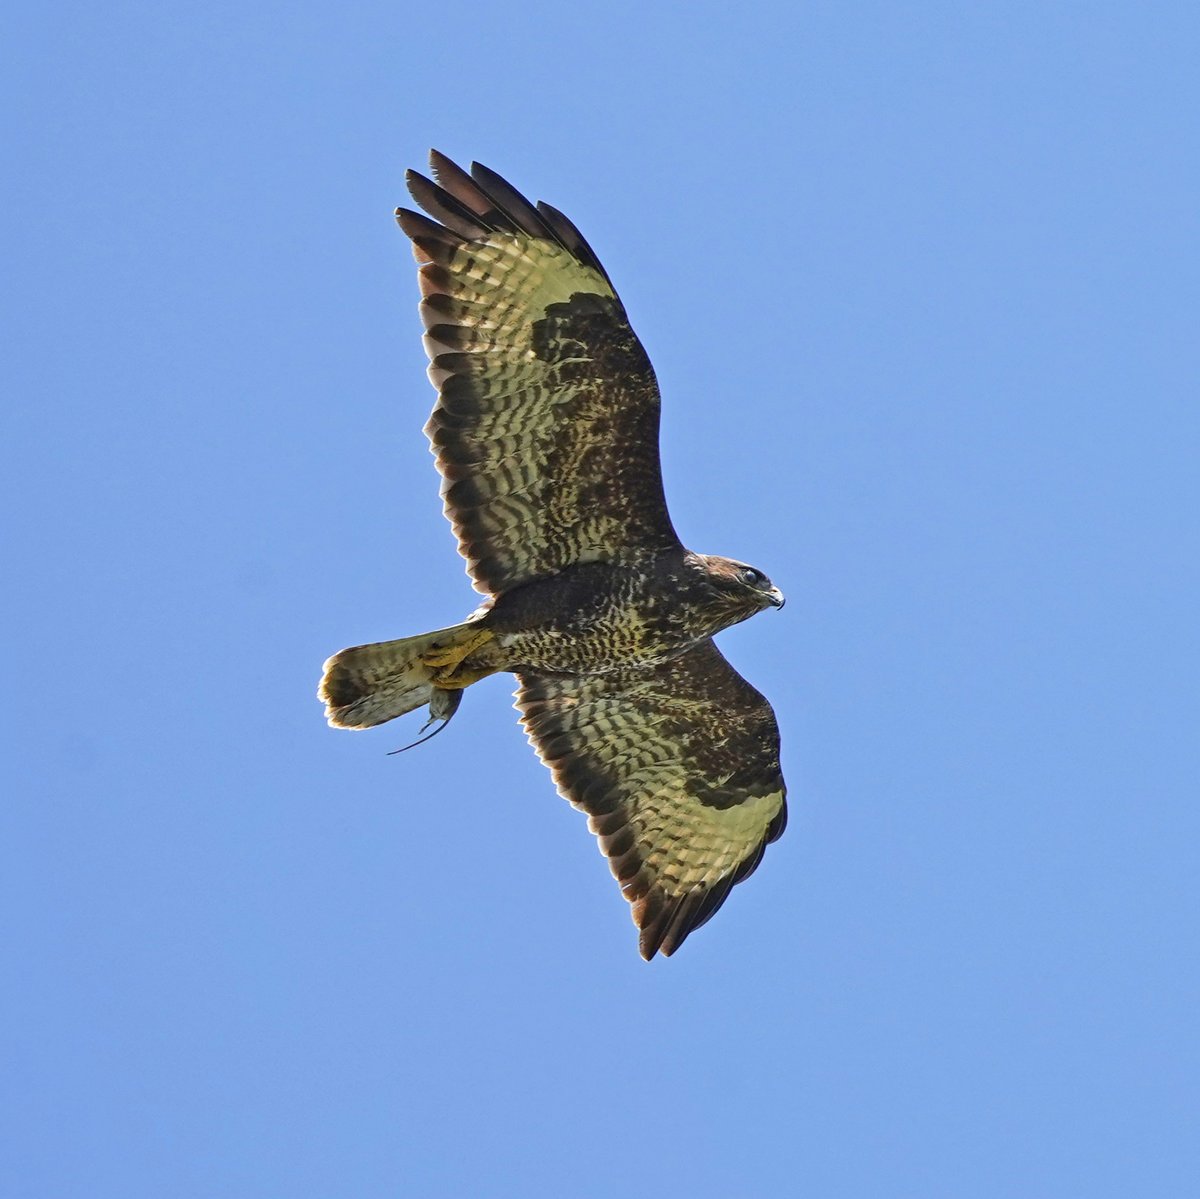 Buzzard and its prey (a rat?) over the house today. Flying back to nest to feed chicks presumably.